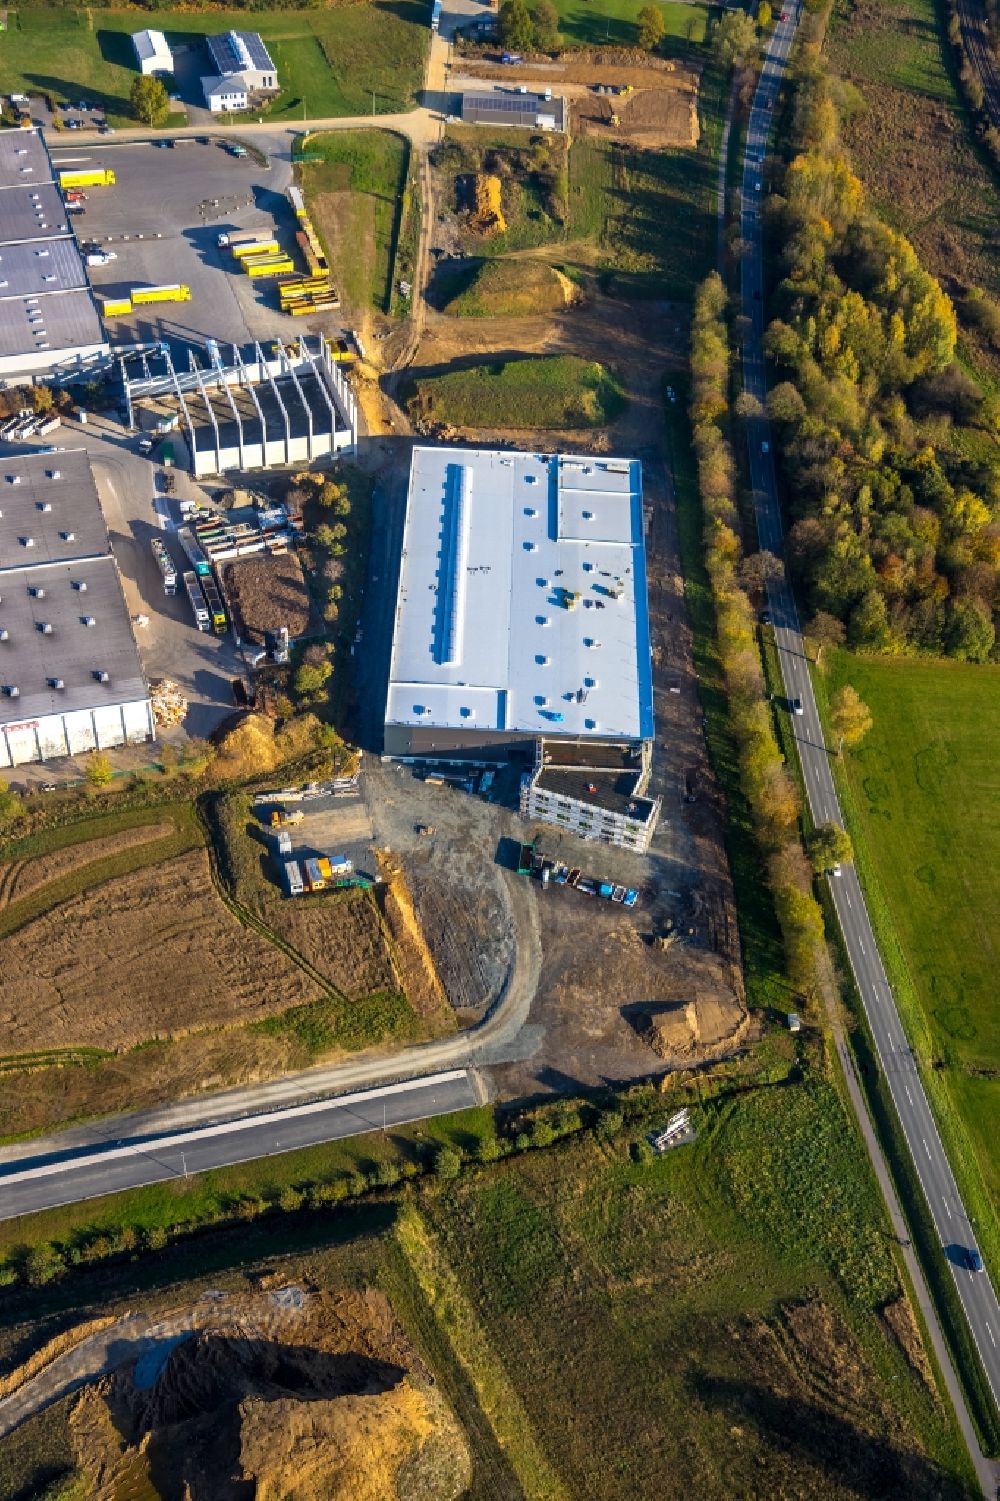 Meschede from the bird's eye view: Building and production halls on the premises of R.A.B.E. Abfallaufbereitung GmbH overlooking a construction site Am Steinbach in the district Enste in Meschede in the state North Rhine-Westphalia, Germany